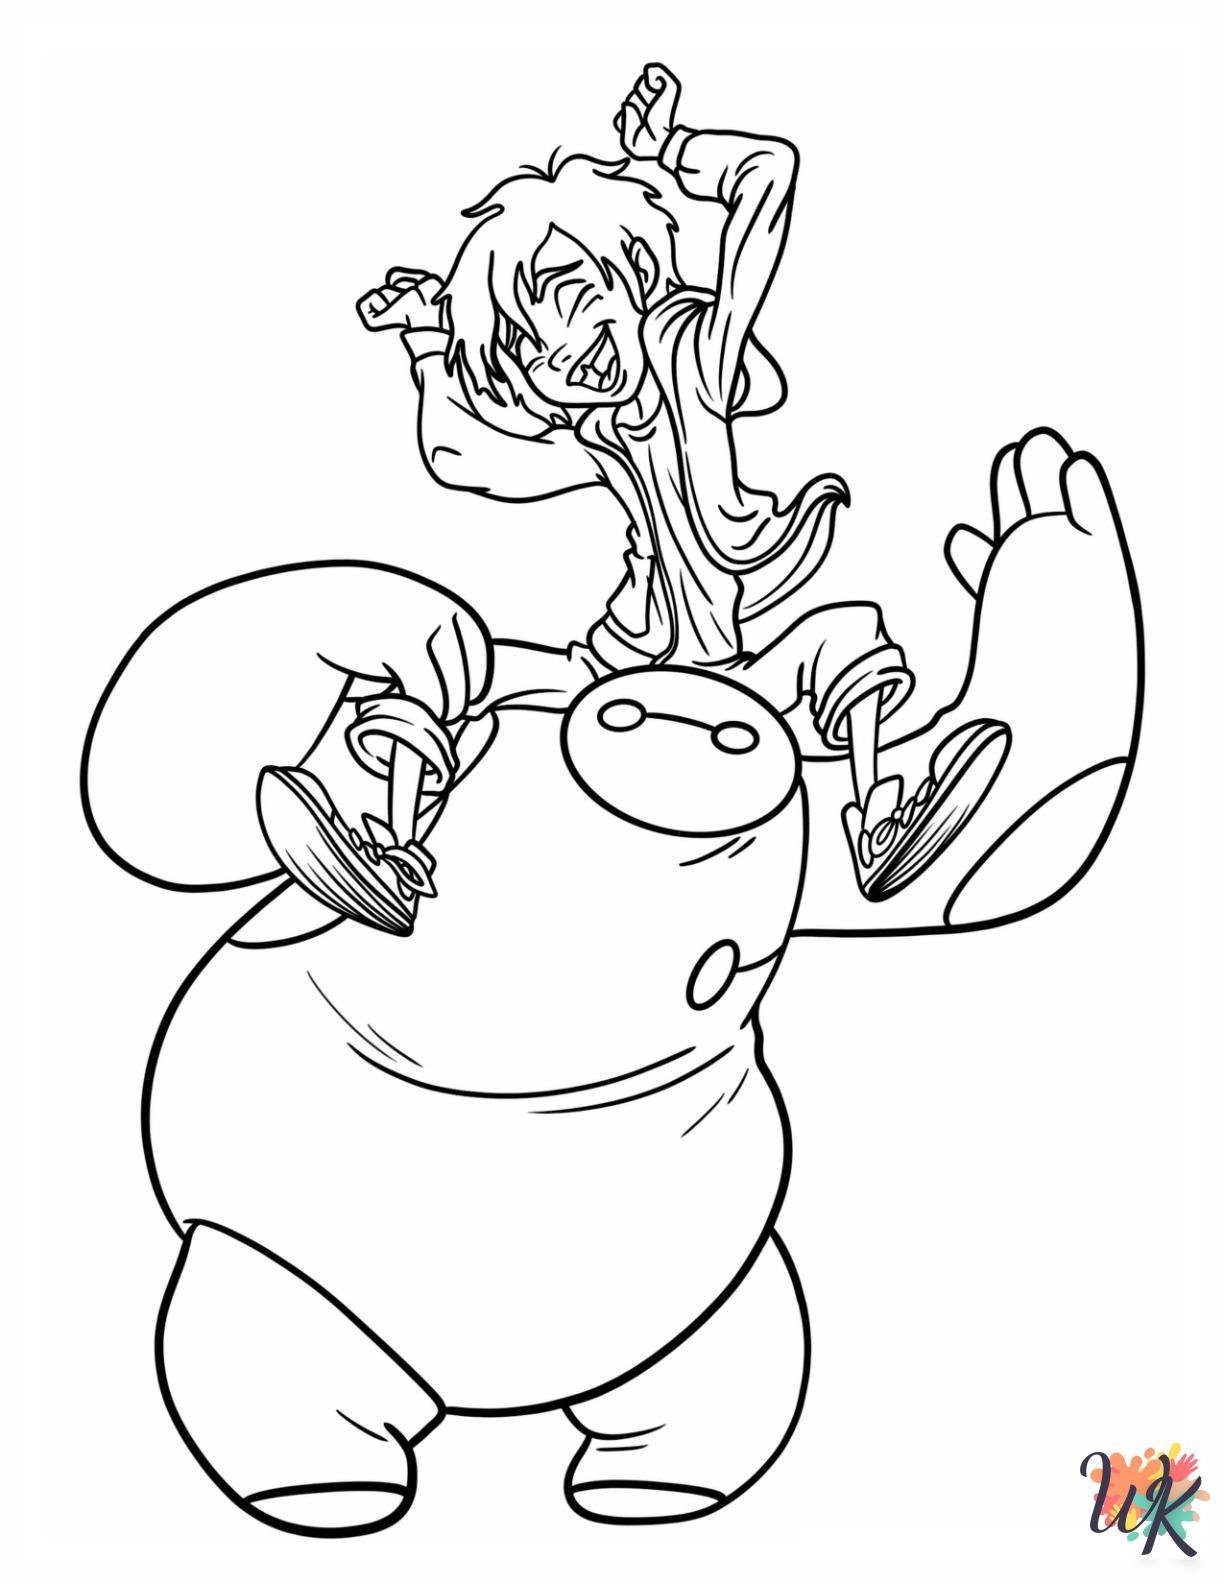 Big Hero 6 Coloring Pages 4